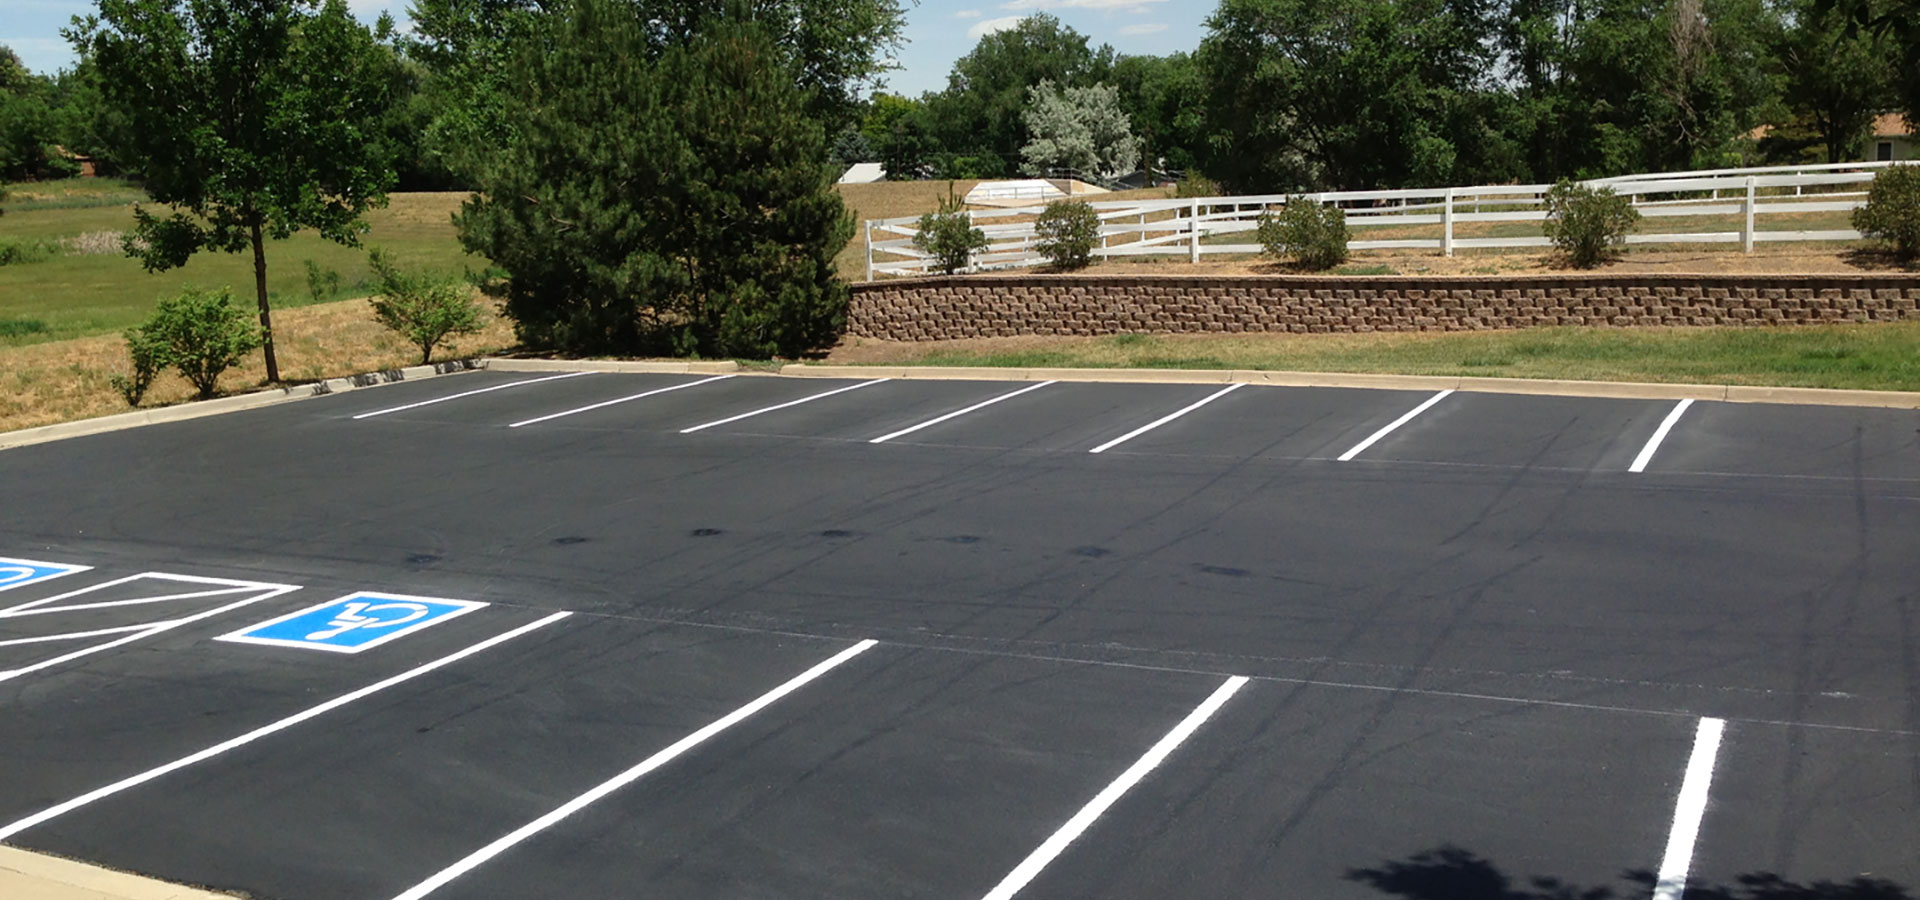 Important Factors to Consider Before Opening a Parking Lot Business in IL